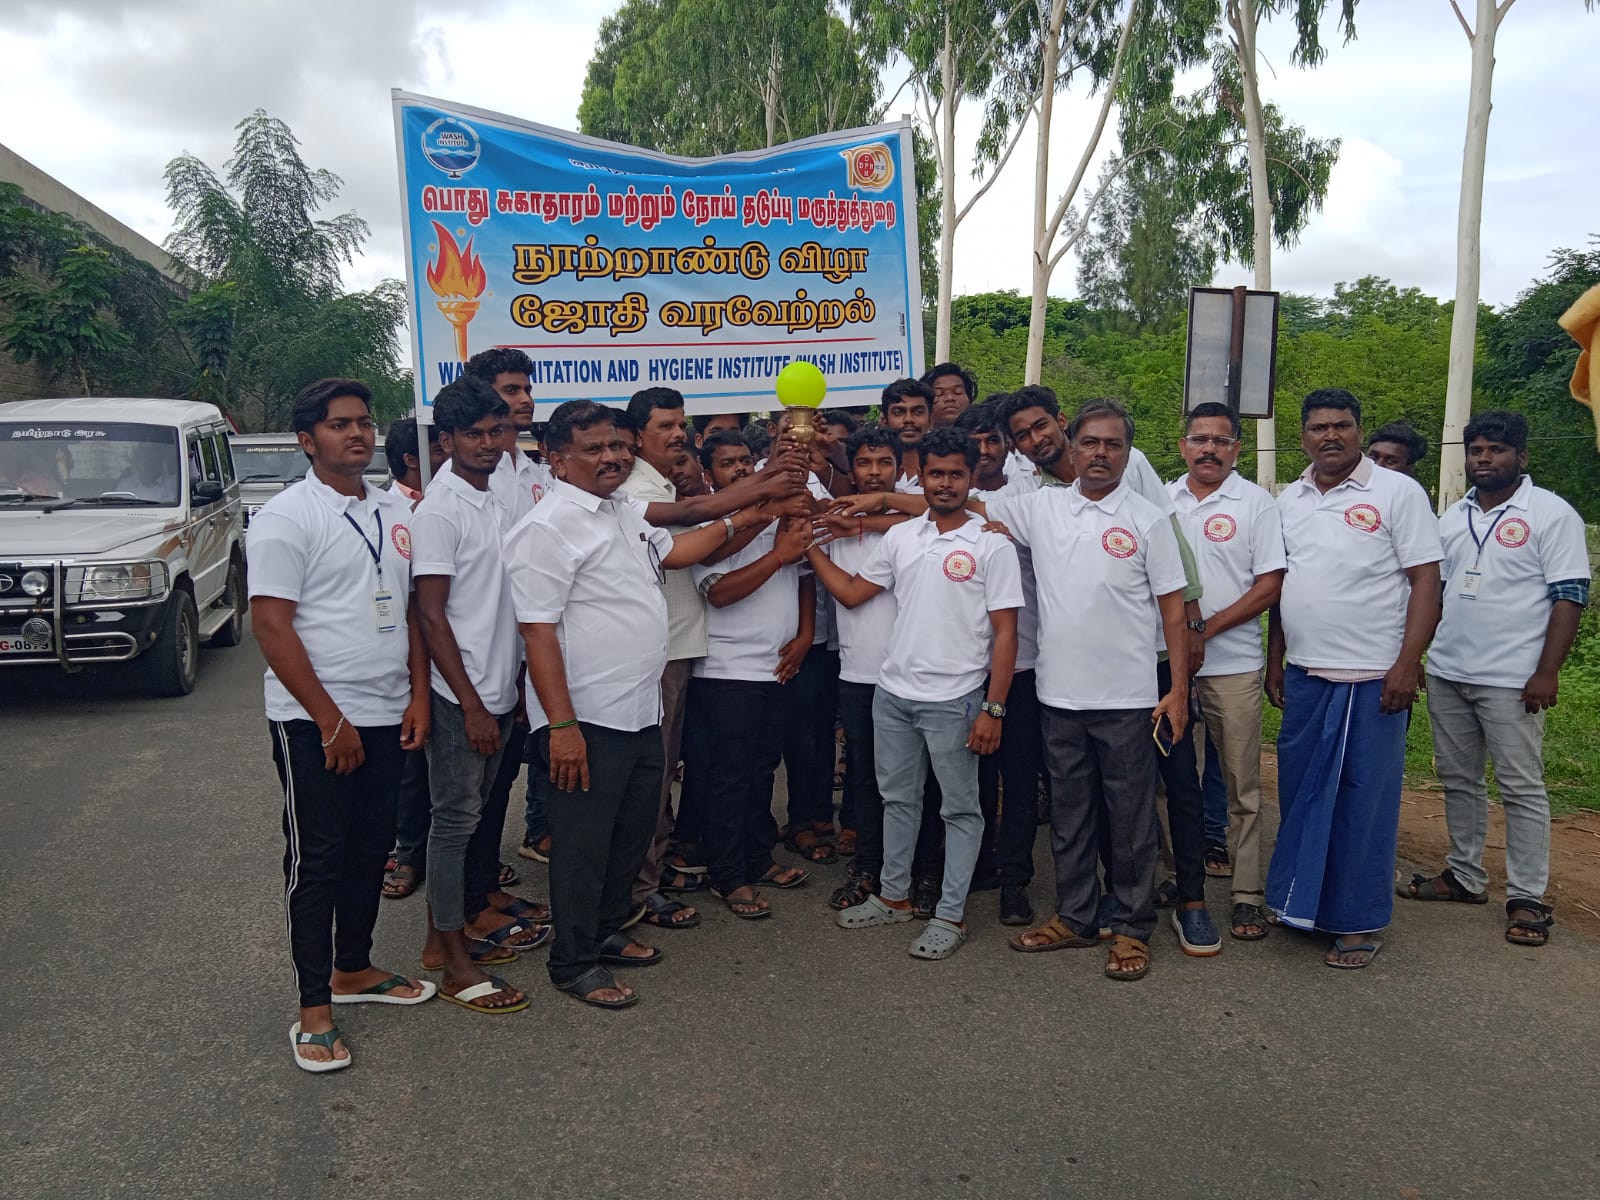  Two-year Diploma in Multipurpose(Male)/Health Inspector/Sanitary Inspector course students of batch 2021-2023 from WASH Institute had participated in a mini marathon organised on NOV 3rd 2022 on the occasion of 100yrs celebration of the Directorate of Public health and Preventive medicine